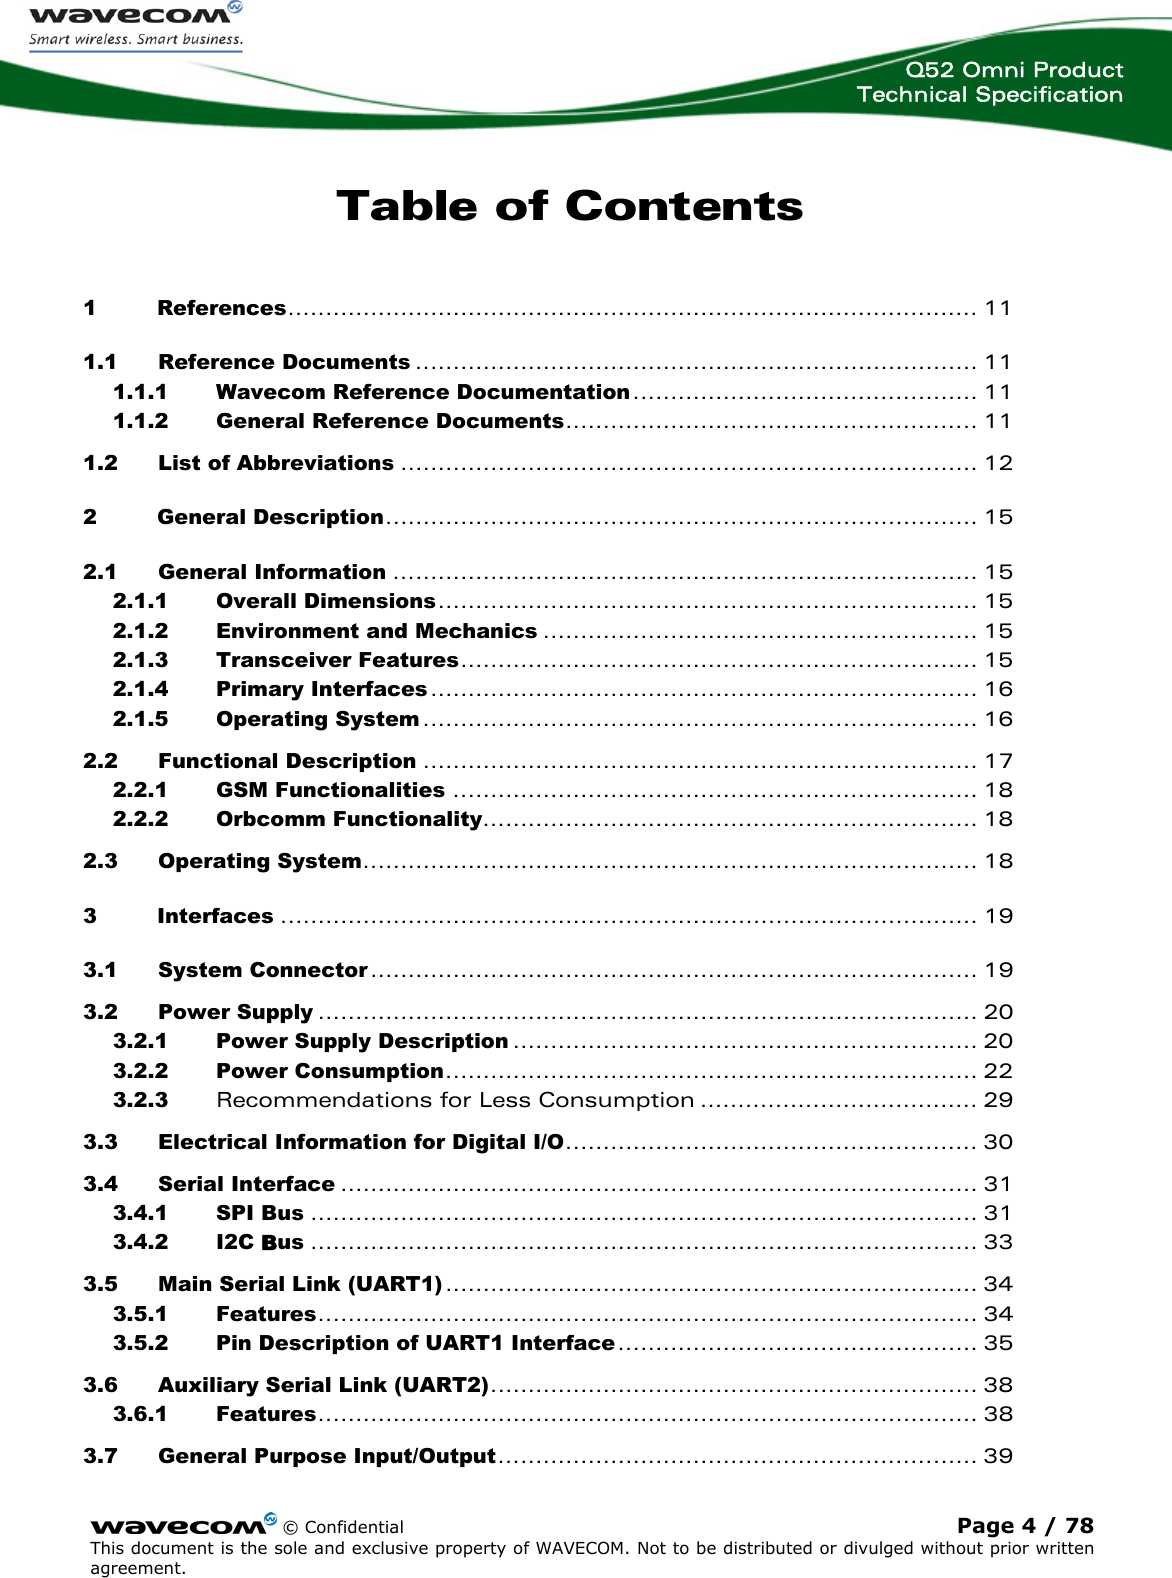  Q52 Omni Product Technical Specification    © Confidential Page 4 / 78 This document is the sole and exclusive property of WAVECOM. Not to be distributed or divulged without prior written agreement.  Table of Contents 1 References............................................................................................ 11 1.1 Reference Documents ........................................................................... 11 1.1.1 Wavecom Reference Documentation.............................................. 11 1.1.2 General Reference Documents....................................................... 11 1.2 List of Abbreviations ............................................................................. 12 2 General Description............................................................................... 15 2.1 General Information .............................................................................. 15 2.1.1 Overall Dimensions........................................................................ 15 2.1.2 Environment and Mechanics .......................................................... 15 2.1.3 Transceiver Features..................................................................... 15 2.1.4 Primary Interfaces......................................................................... 16 2.1.5 Operating System .......................................................................... 16 2.2 Functional Description .......................................................................... 17 2.2.1 GSM Functionalities ...................................................................... 18 2.2.2 Orbcomm Functionality.................................................................. 18 2.3 Operating System.................................................................................. 18 3 Interfaces ............................................................................................. 19 3.1 System Connector................................................................................. 19 3.2 Power Supply ........................................................................................ 20 3.2.1 Power Supply Description .............................................................. 20 3.2.2 Power Consumption....................................................................... 22 3.2.3 Recommendations for Less Consumption ..................................... 29 3.3 Electrical Information for Digital I/O....................................................... 30 3.4 Serial Interface ..................................................................................... 31 3.4.1 SPI Bus ......................................................................................... 31 3.4.2 I2C Bus ......................................................................................... 33 3.5 Main Serial Link (UART1)....................................................................... 34 3.5.1 Features........................................................................................ 34 3.5.2 Pin Description of UART1 Interface................................................ 35 3.6 Auxiliary Serial Link (UART2)................................................................. 38 3.6.1 Features........................................................................................ 38 3.7 General Purpose Input/Output................................................................ 39 